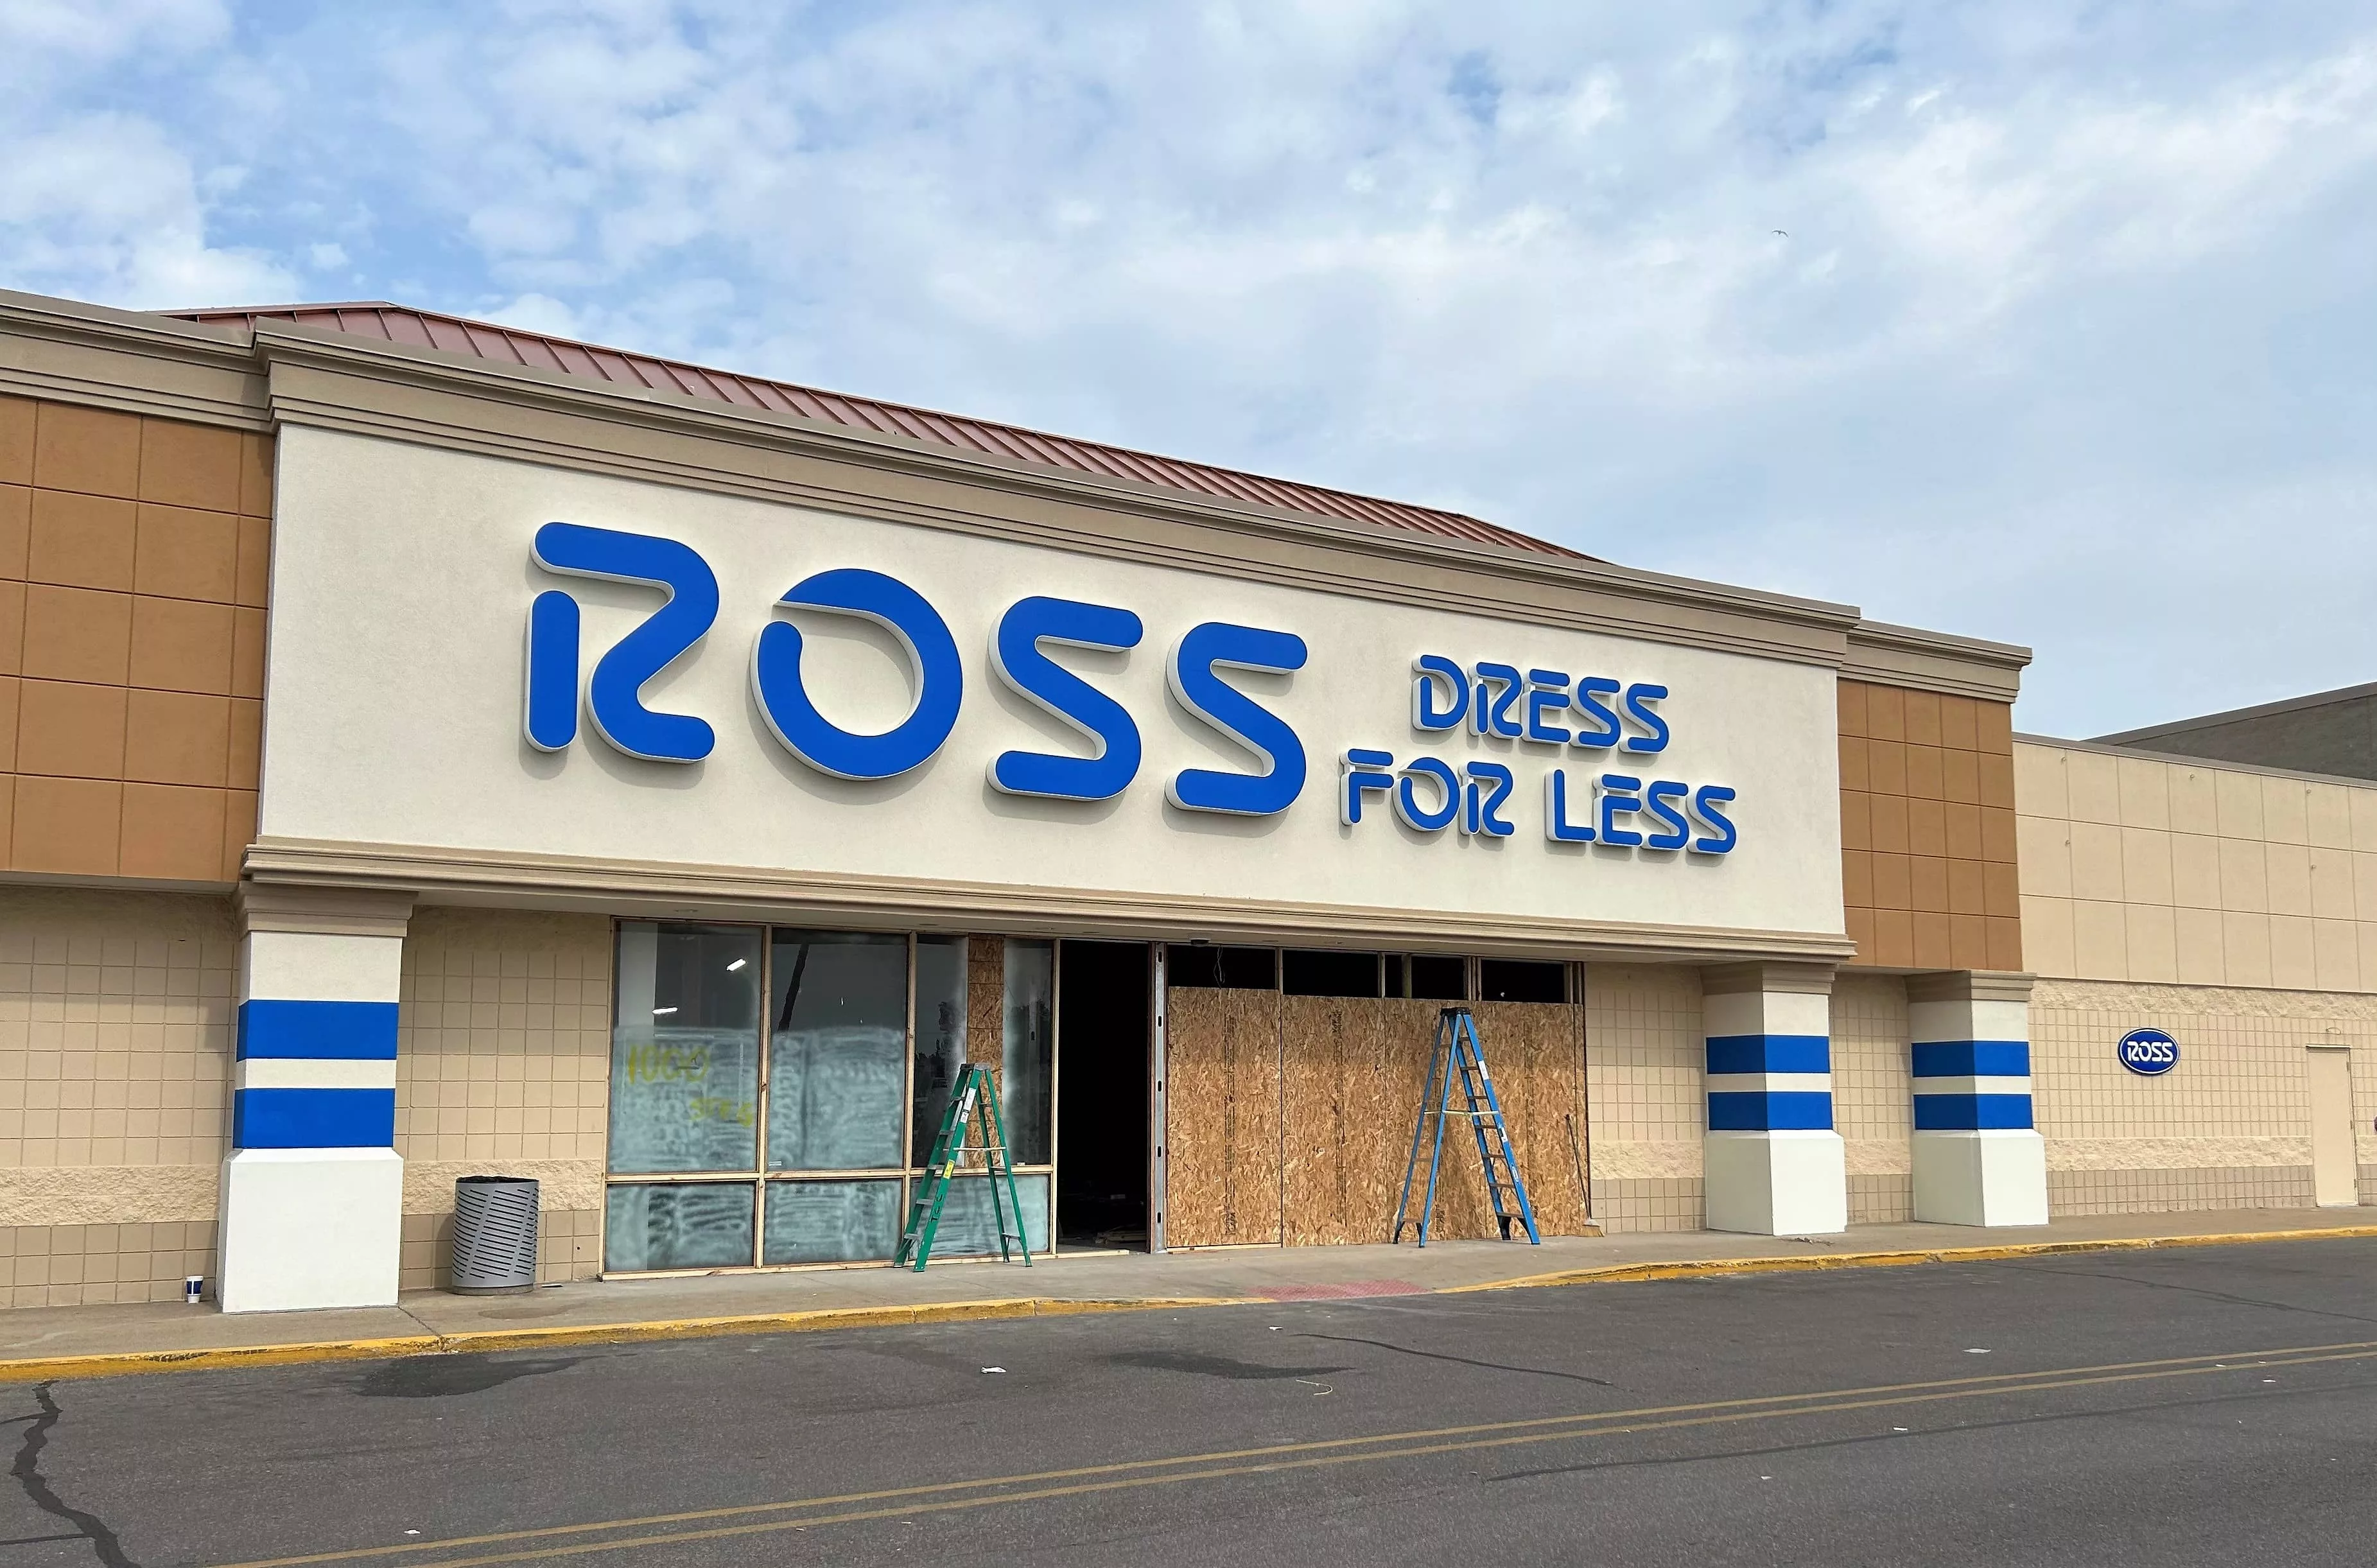 Florida Ross Dress for Less Slip and Fall Accident and Injury Lawyer